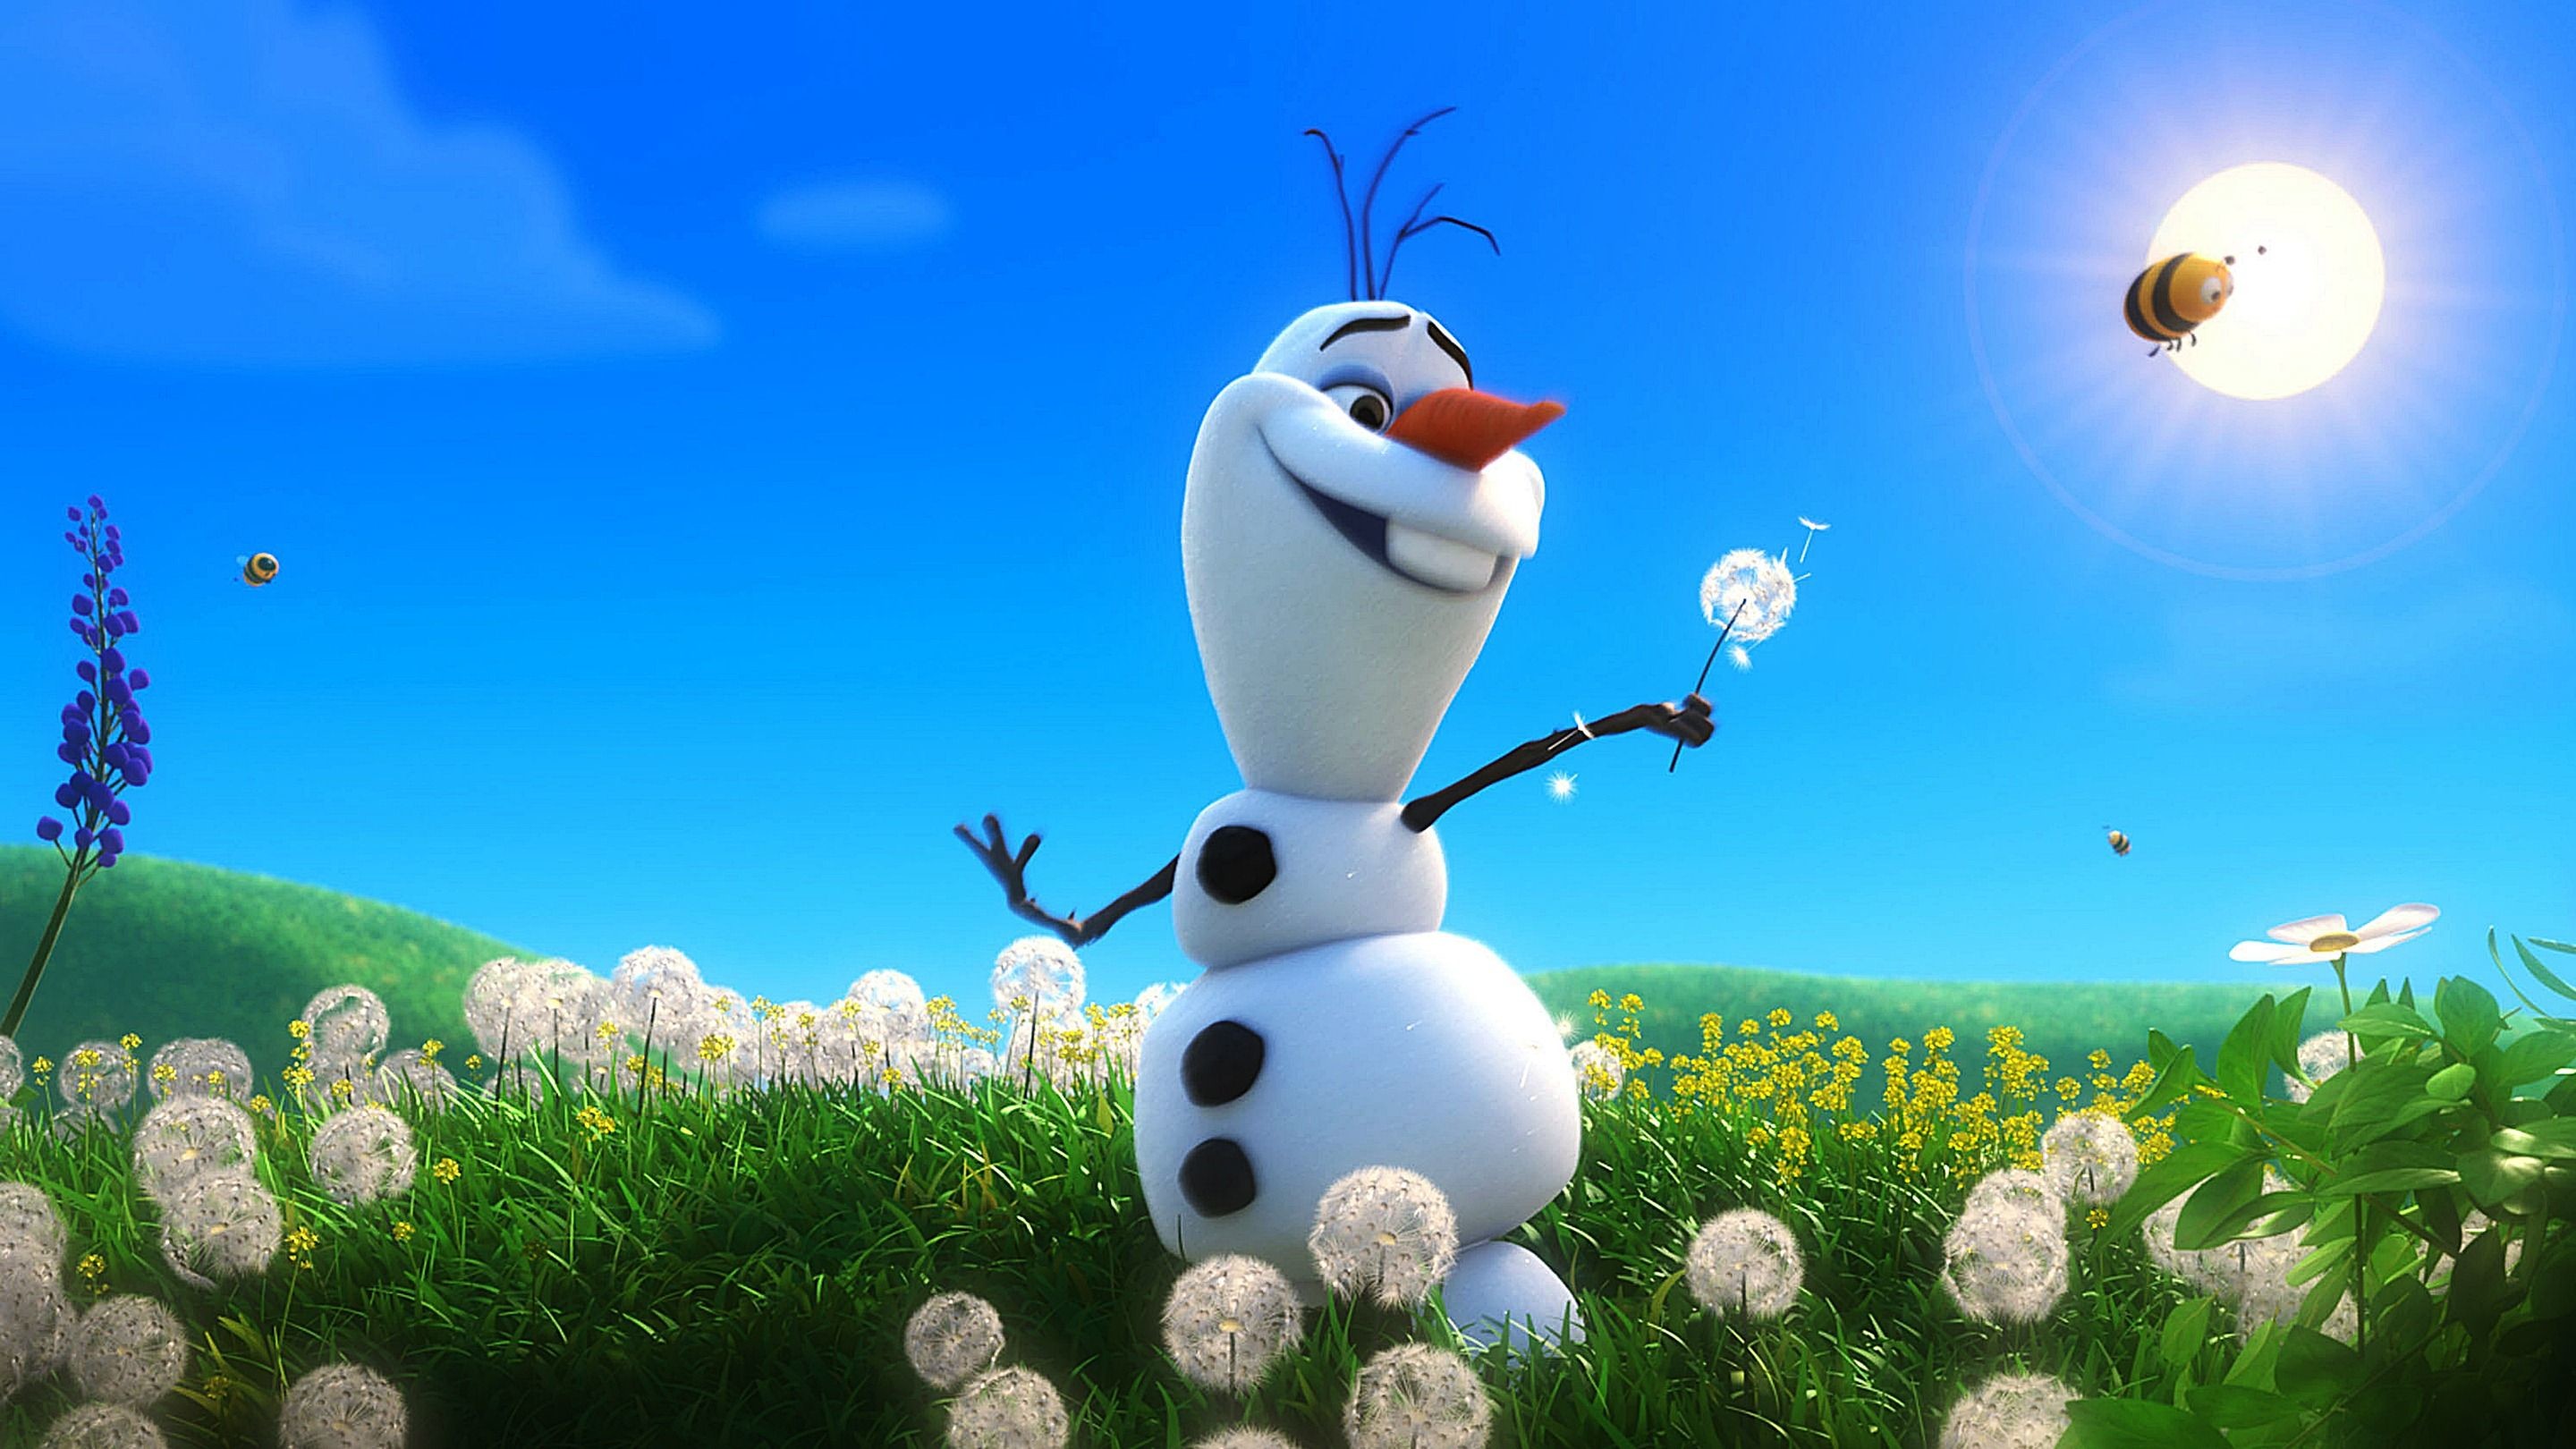 2880x1620 olaf wallpapers hd desktop wallpapers hd 4k high definition windows 10 mac  apple colourful images free 2880Ã1620 Wallpaper HD